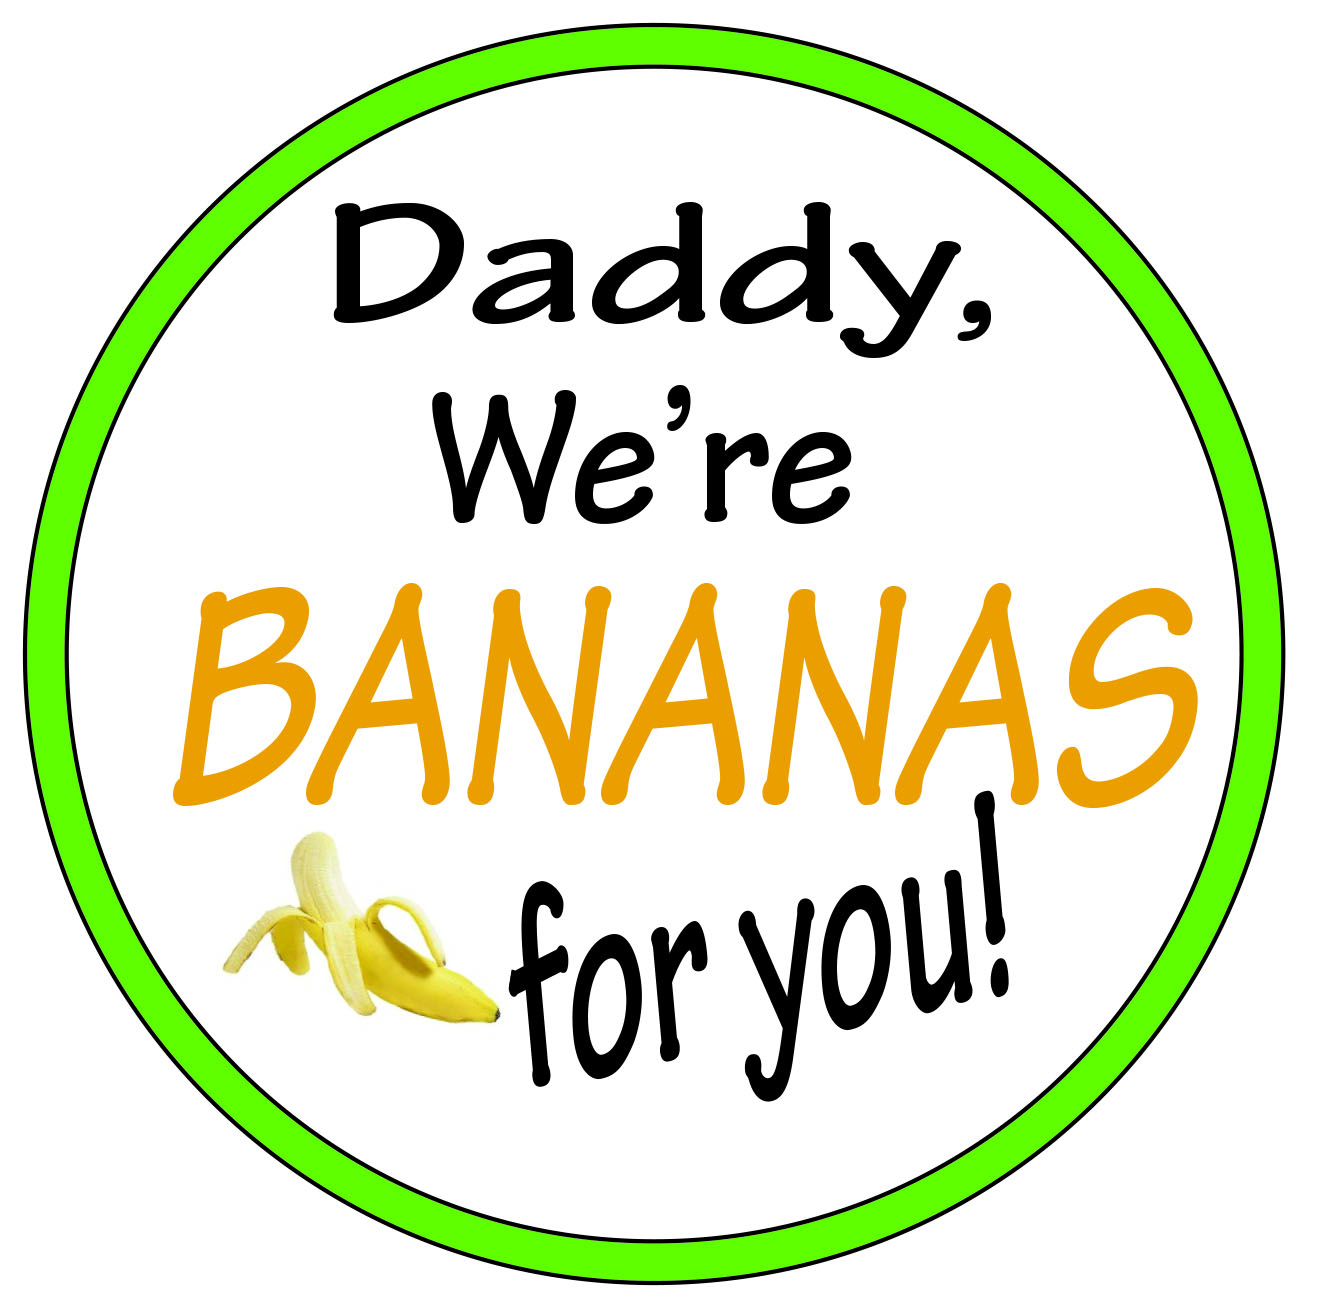 Us daddy. Cuban Bread. Glazer Family. Вакка PNG. July month Clipart.